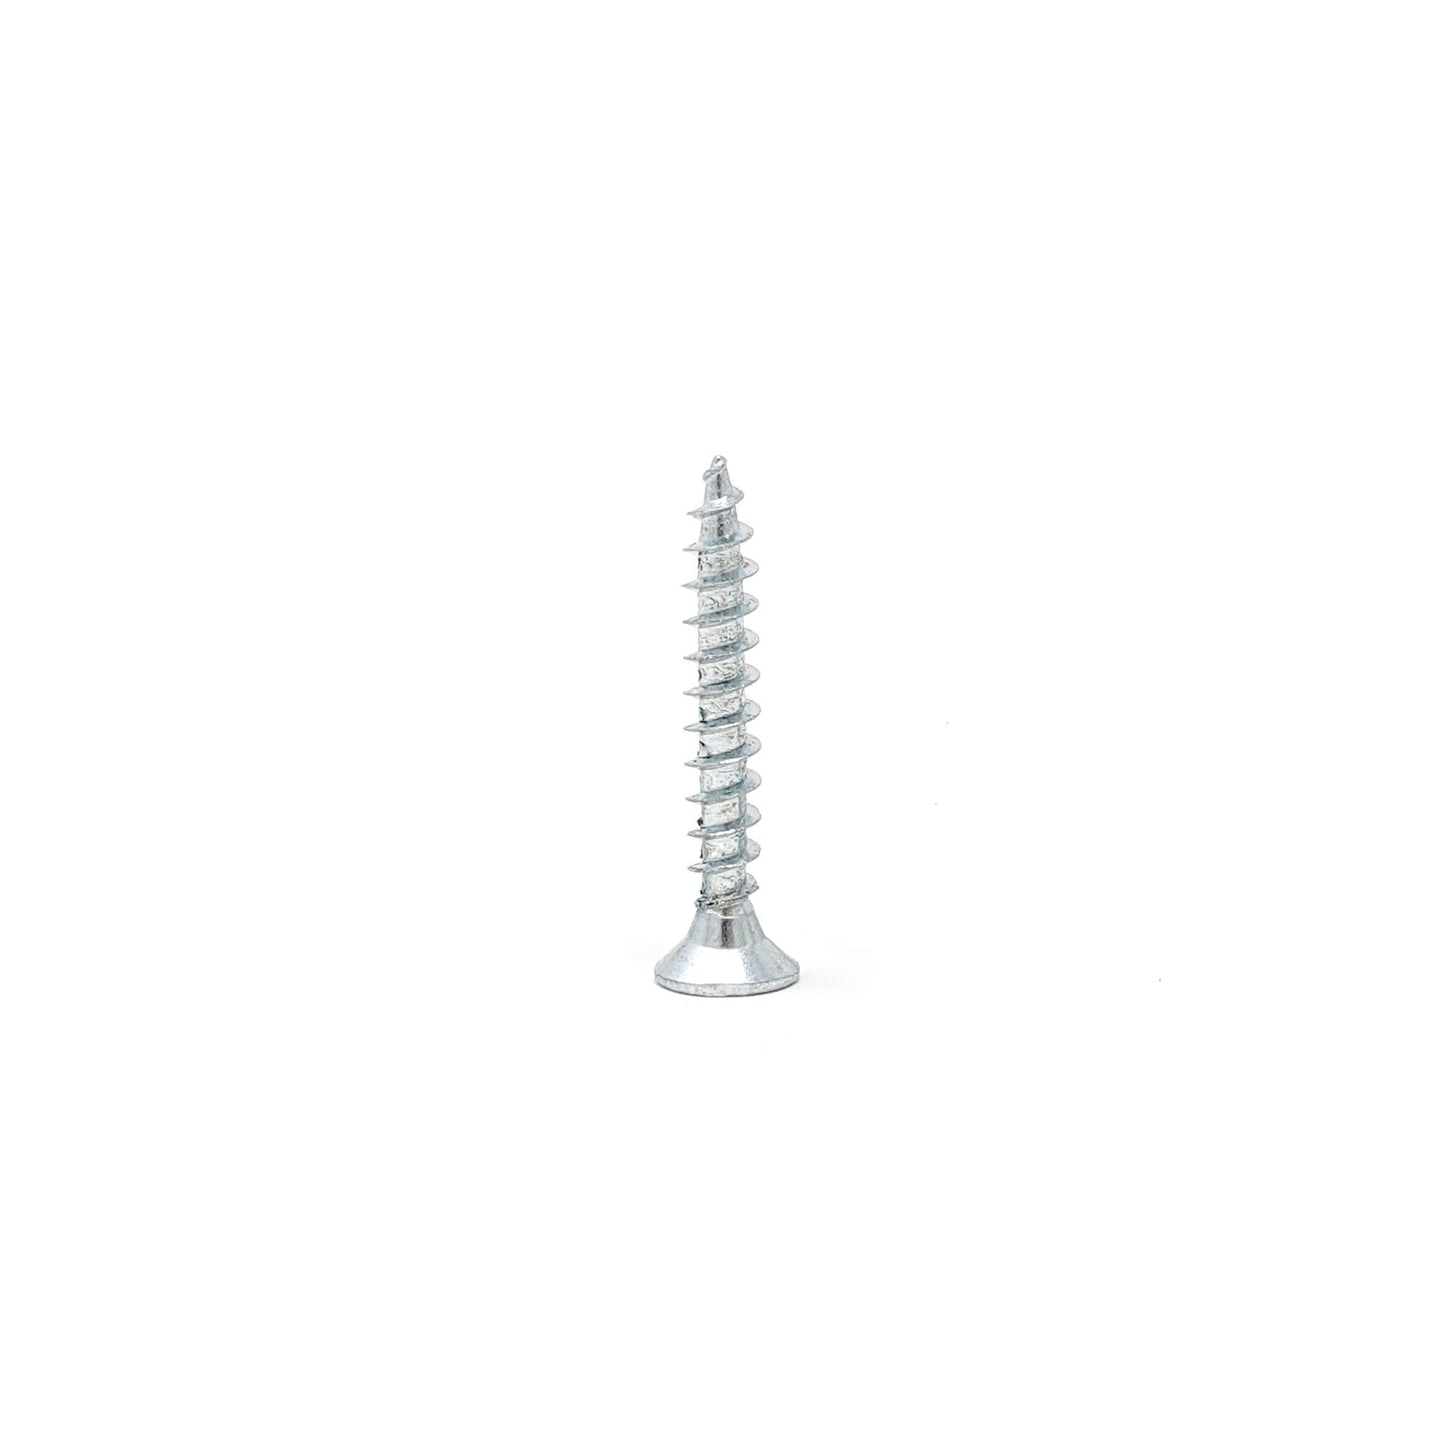 Wood Screws, Pozi Countersunk 3.5mm (No.6) Zinc Plated Steel | Made in Germany | Keay Vital Parts